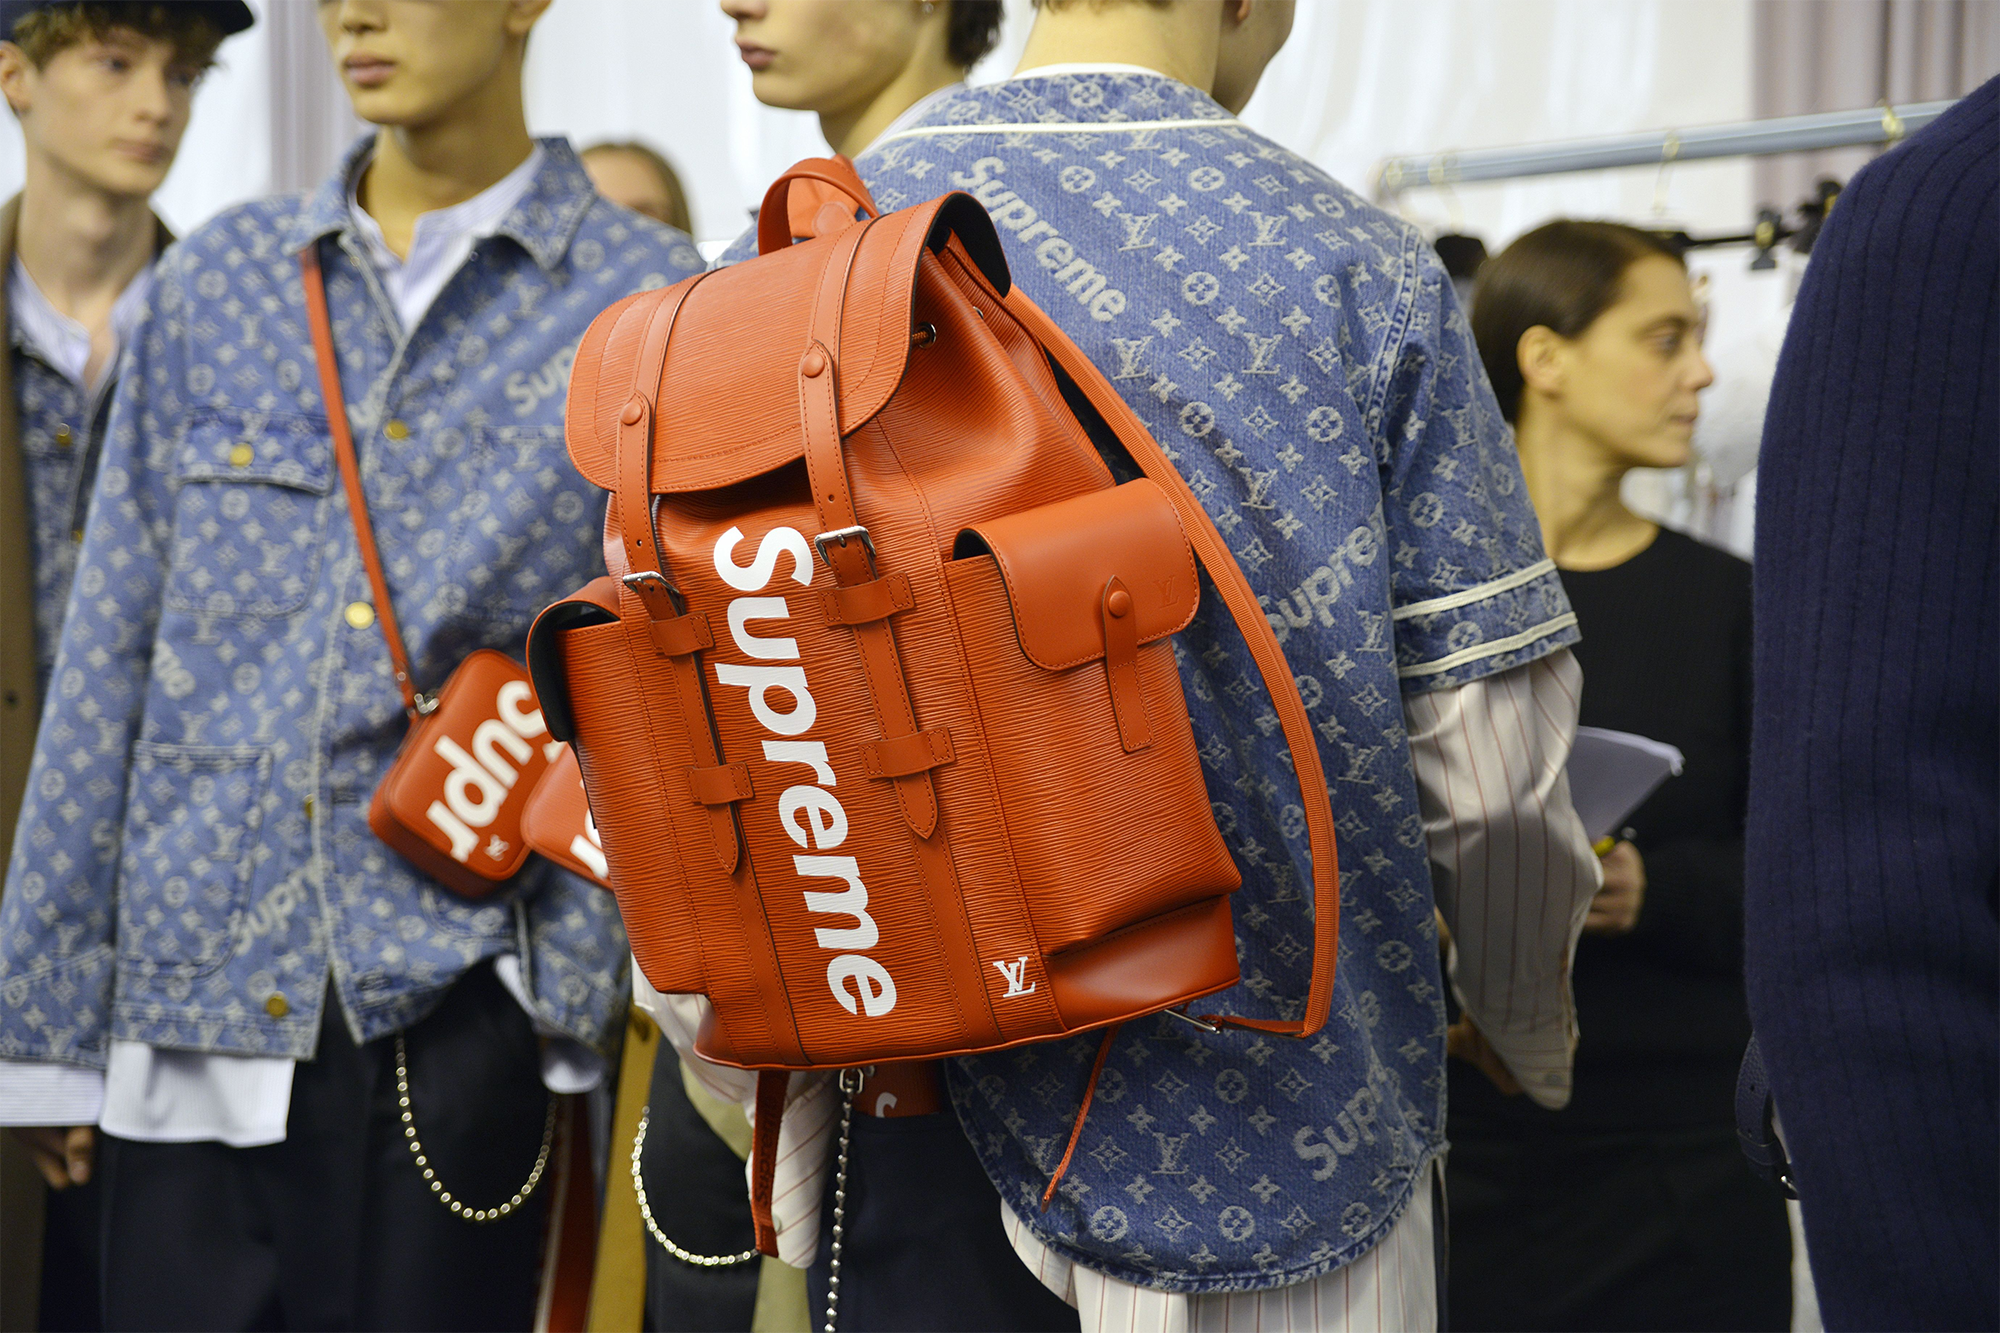 What is the fuss over Louis Vuitton x Supreme all about?